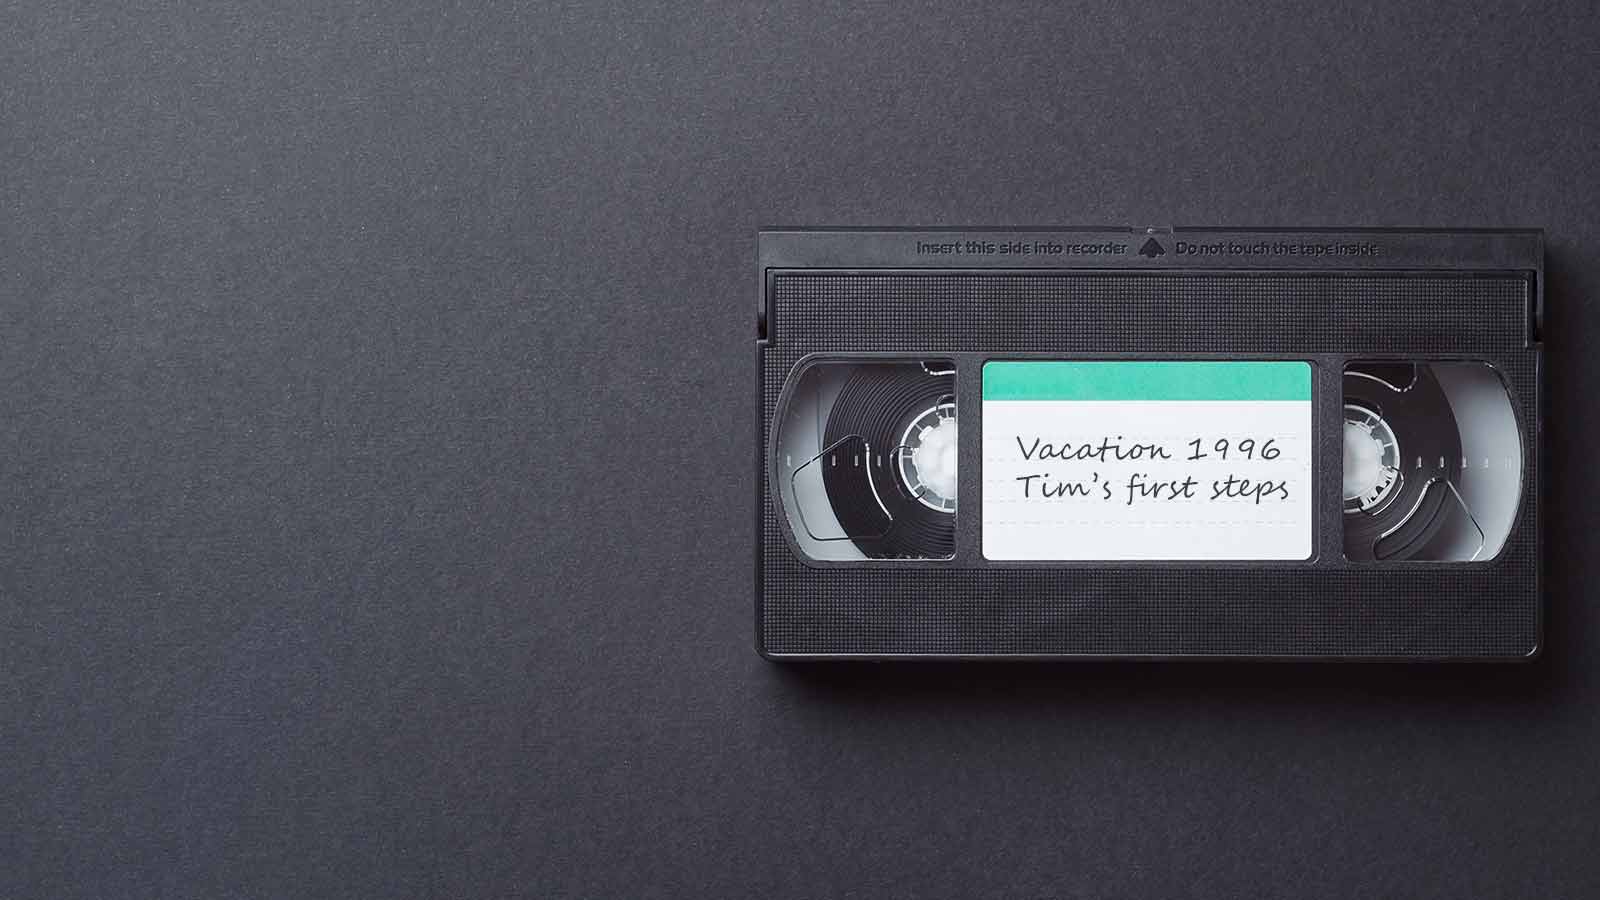 VHS to Digital: Amazing Process to Digitize VHS Tapes